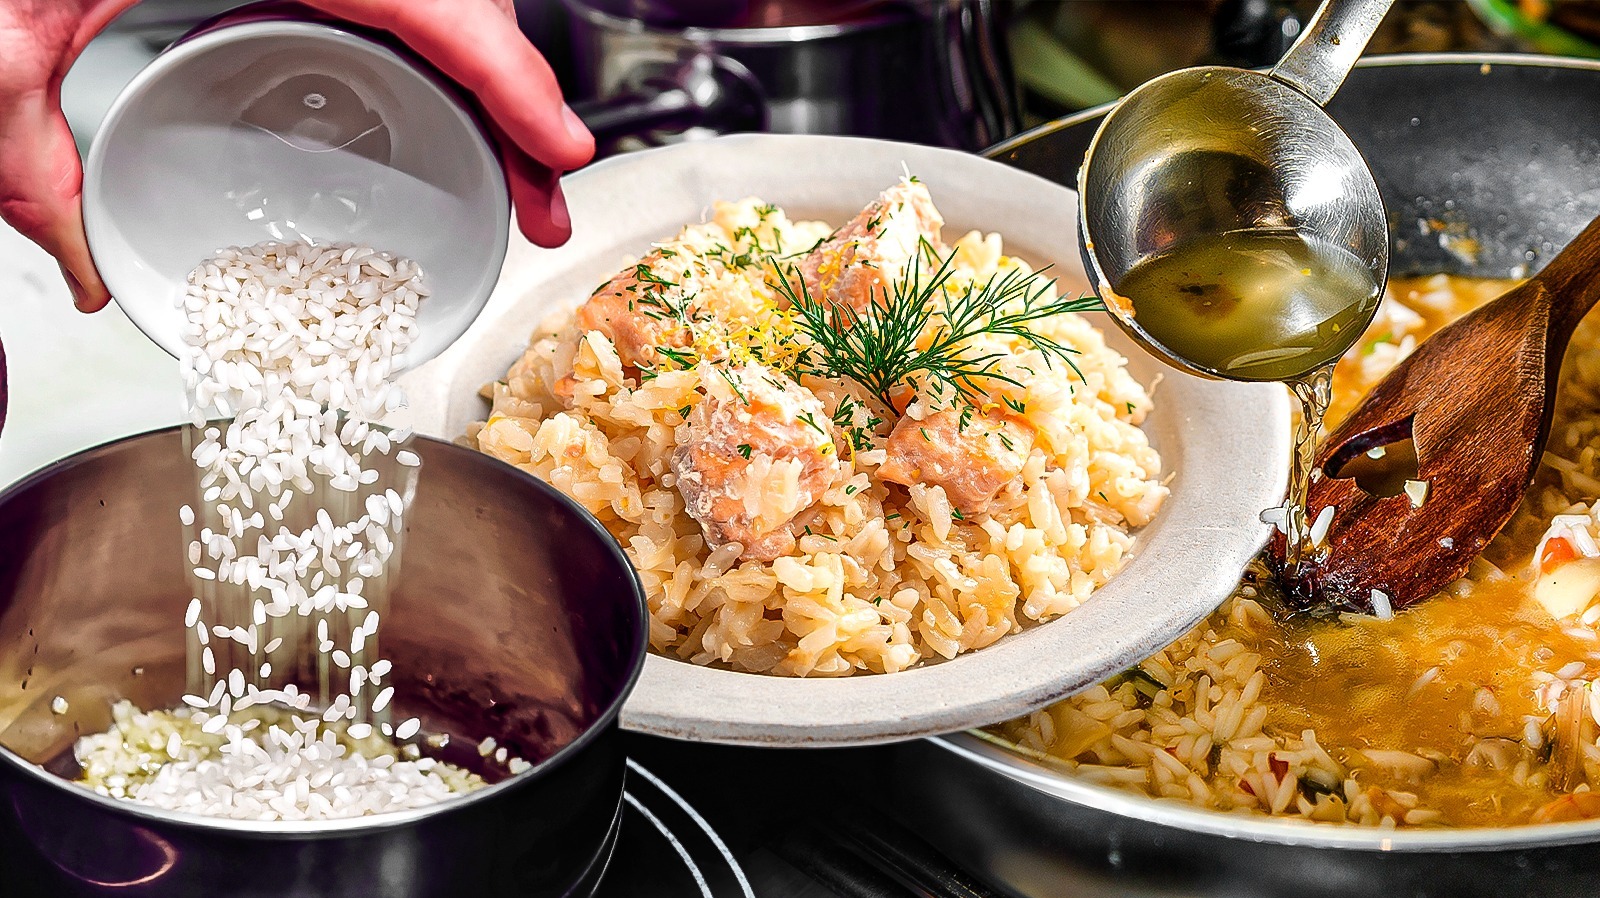 https://www.thedailymeal.com/img/gallery/13-tips-for-making-risotto-like-a-pro/l-intro-1688741739.jpg